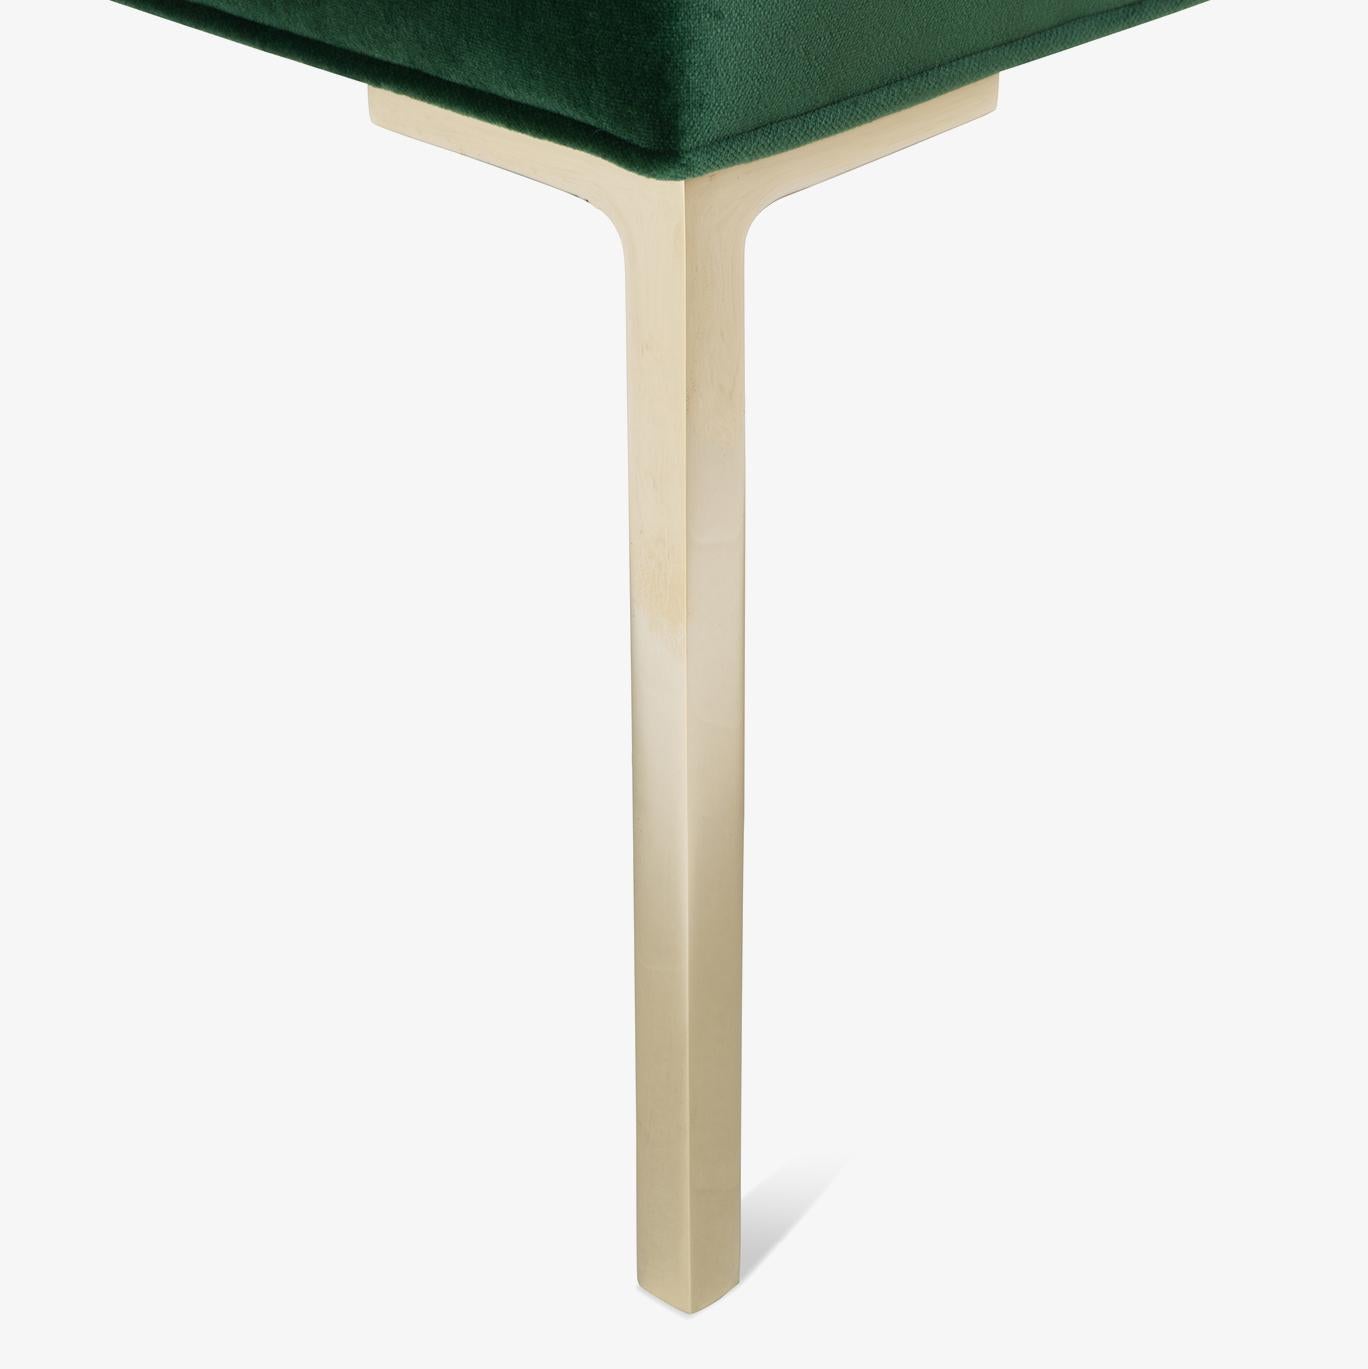 Polished Astor Square Brass Ottoman in Emerald Velvet by Montage For Sale